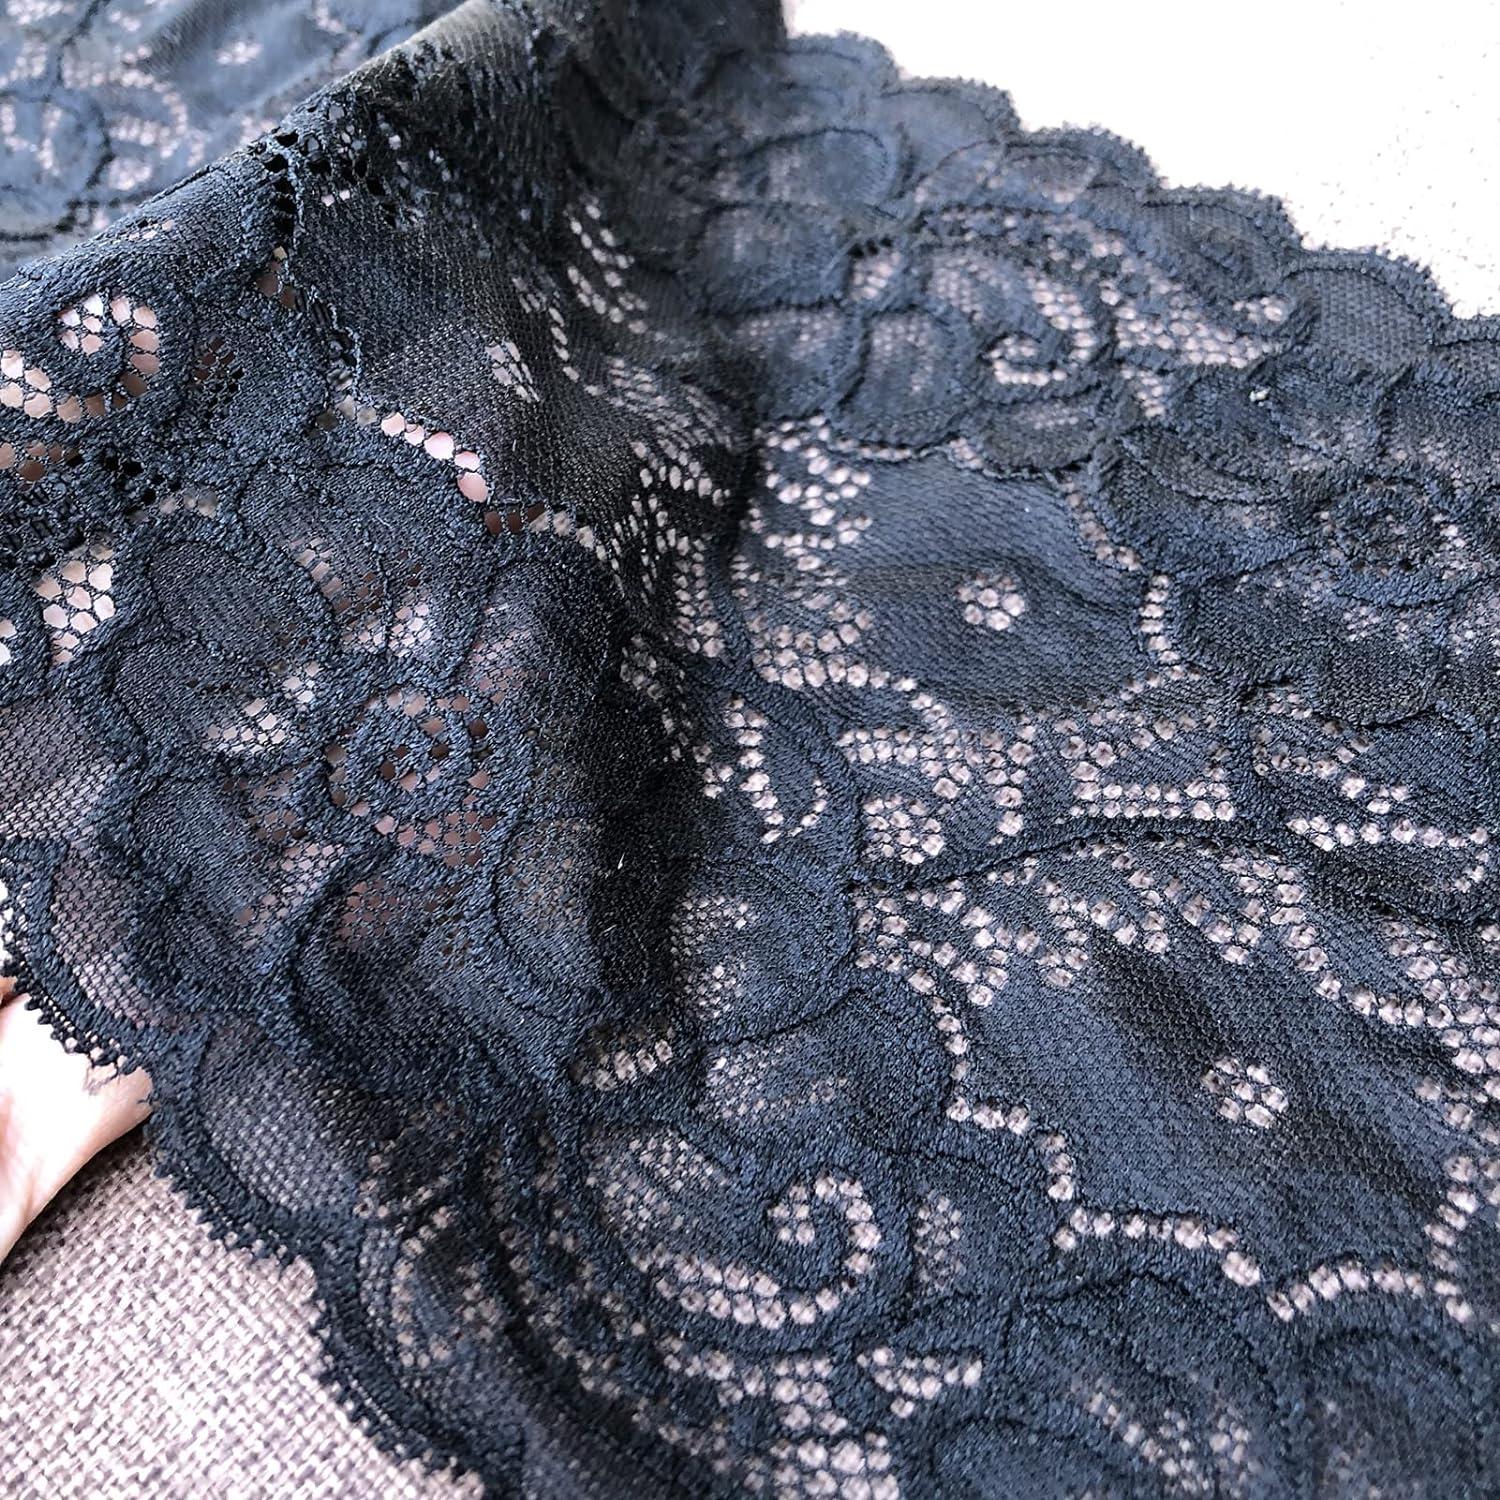 Five Inch Silver Black Floral Stretch Lace